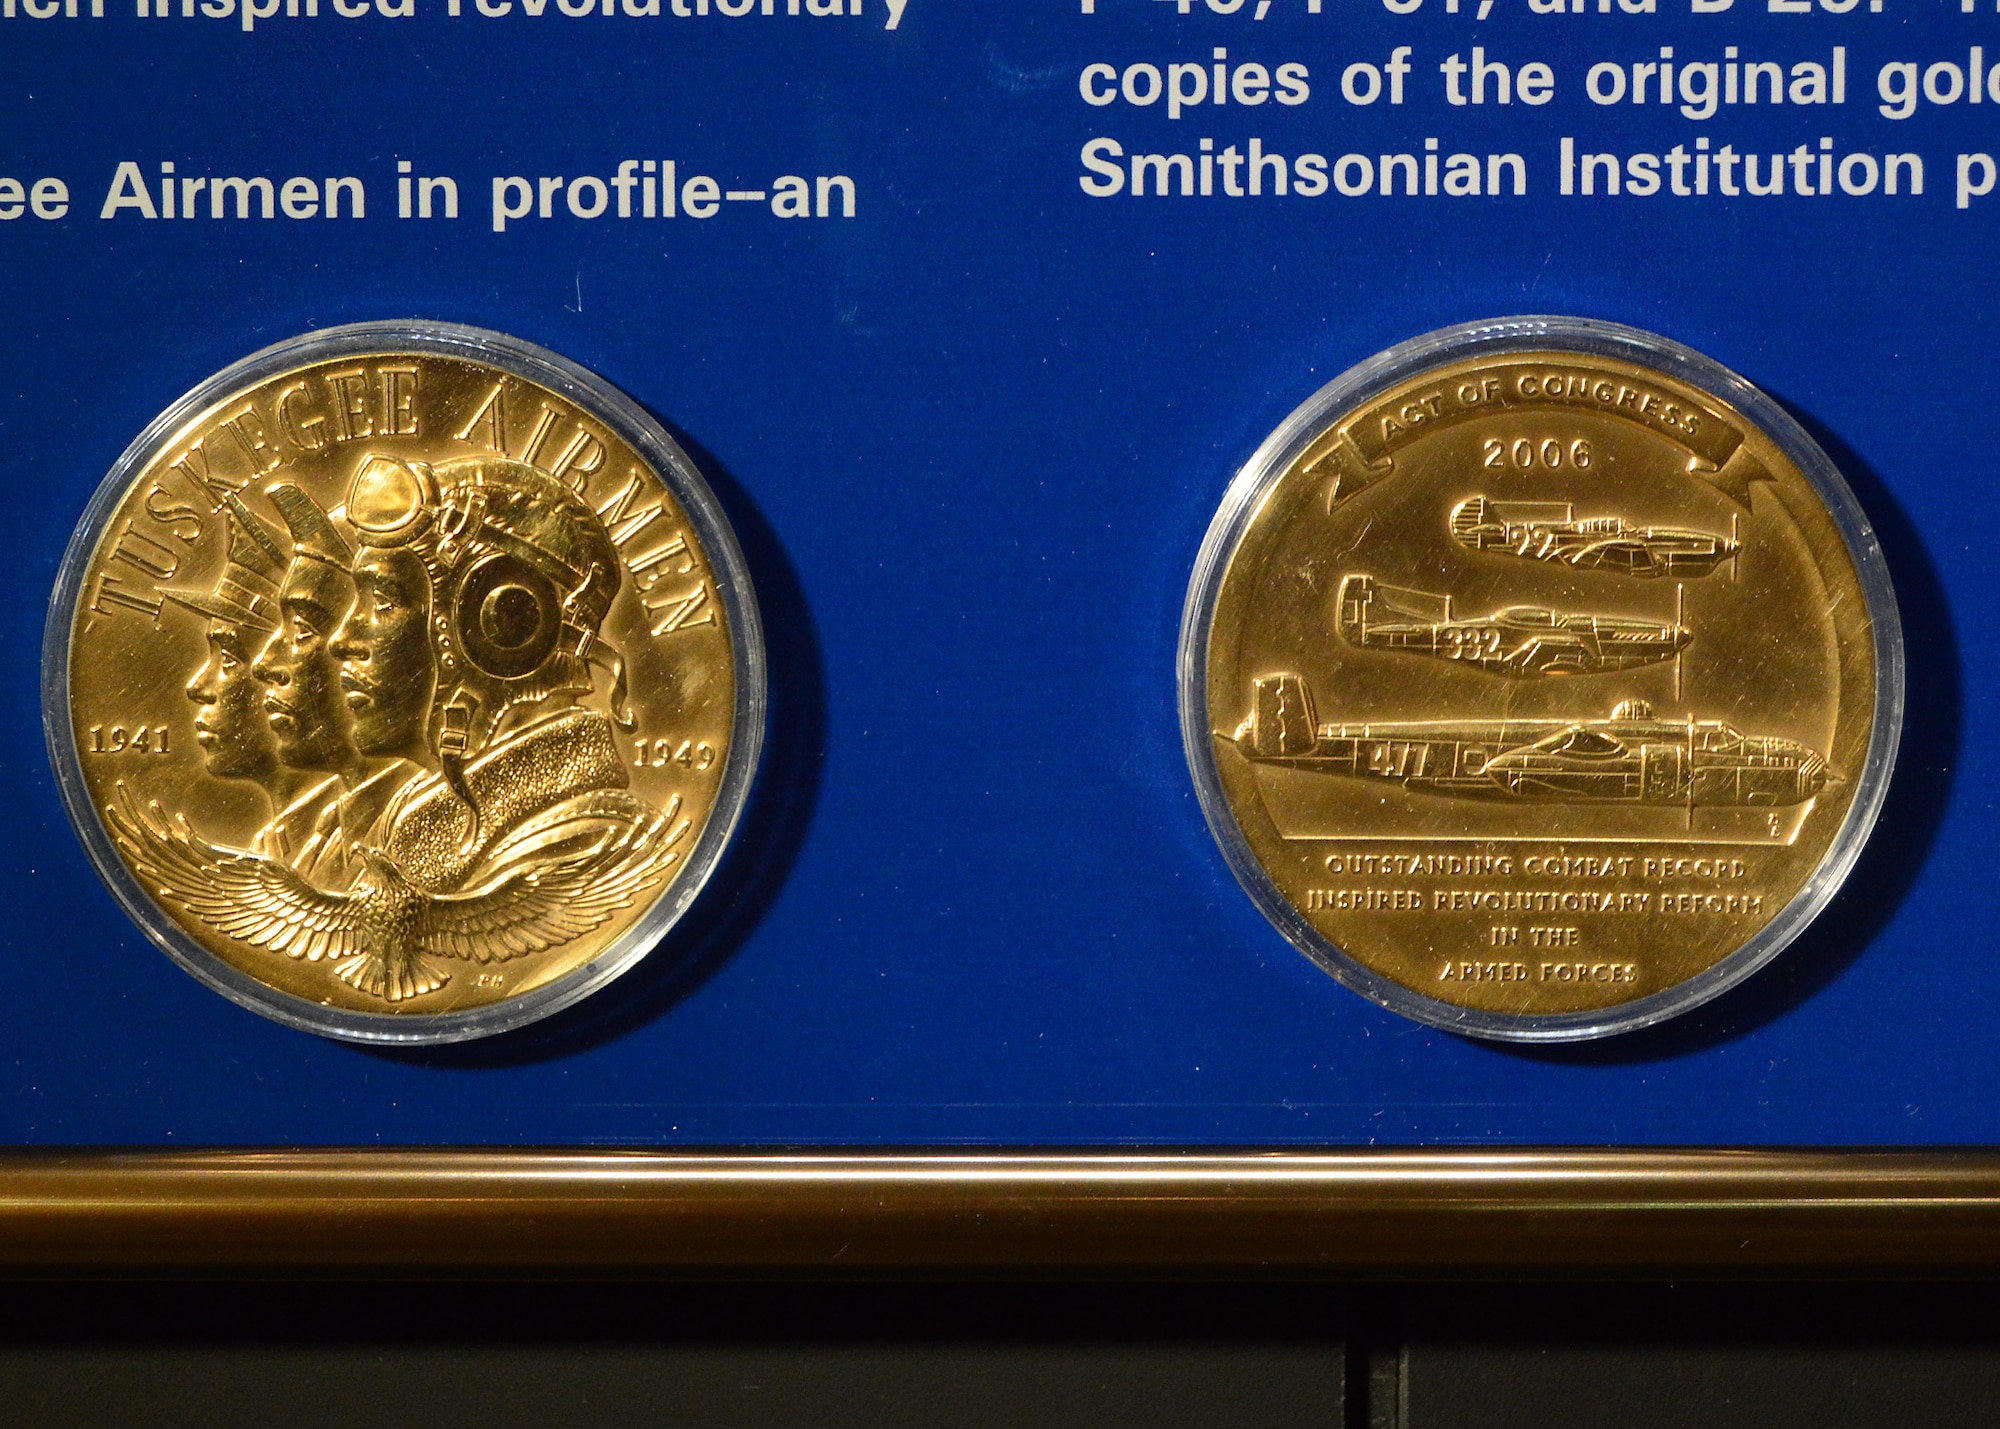 DAYTON, Ohio -- The Tuskegee Airmen Congressional Gold Medal display in the WWII Gallery at the National Museum of the U.S. Air Force. In April 2006, the U.S. Congress voted to award the Tuskegee Airmen a Congressional Gold Medal, the most prestigious award Congress can give to civilians. (U.S. Air Force photo) 
